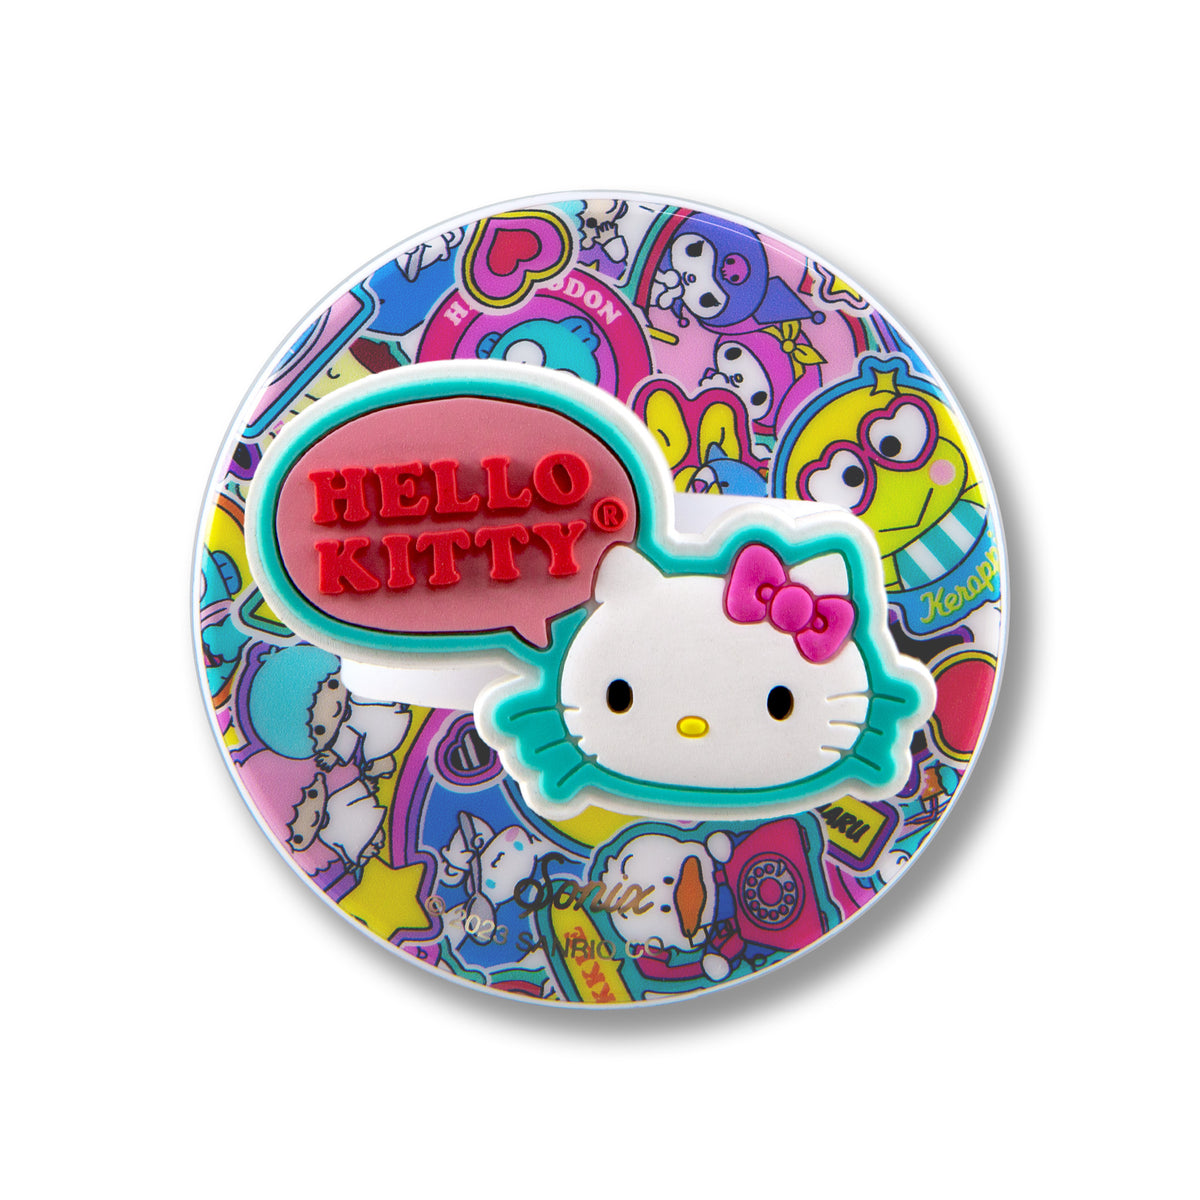 Hello Kitty and Friends x Sonix Stickers Magnetic Ring Accessory BySonix Inc.   